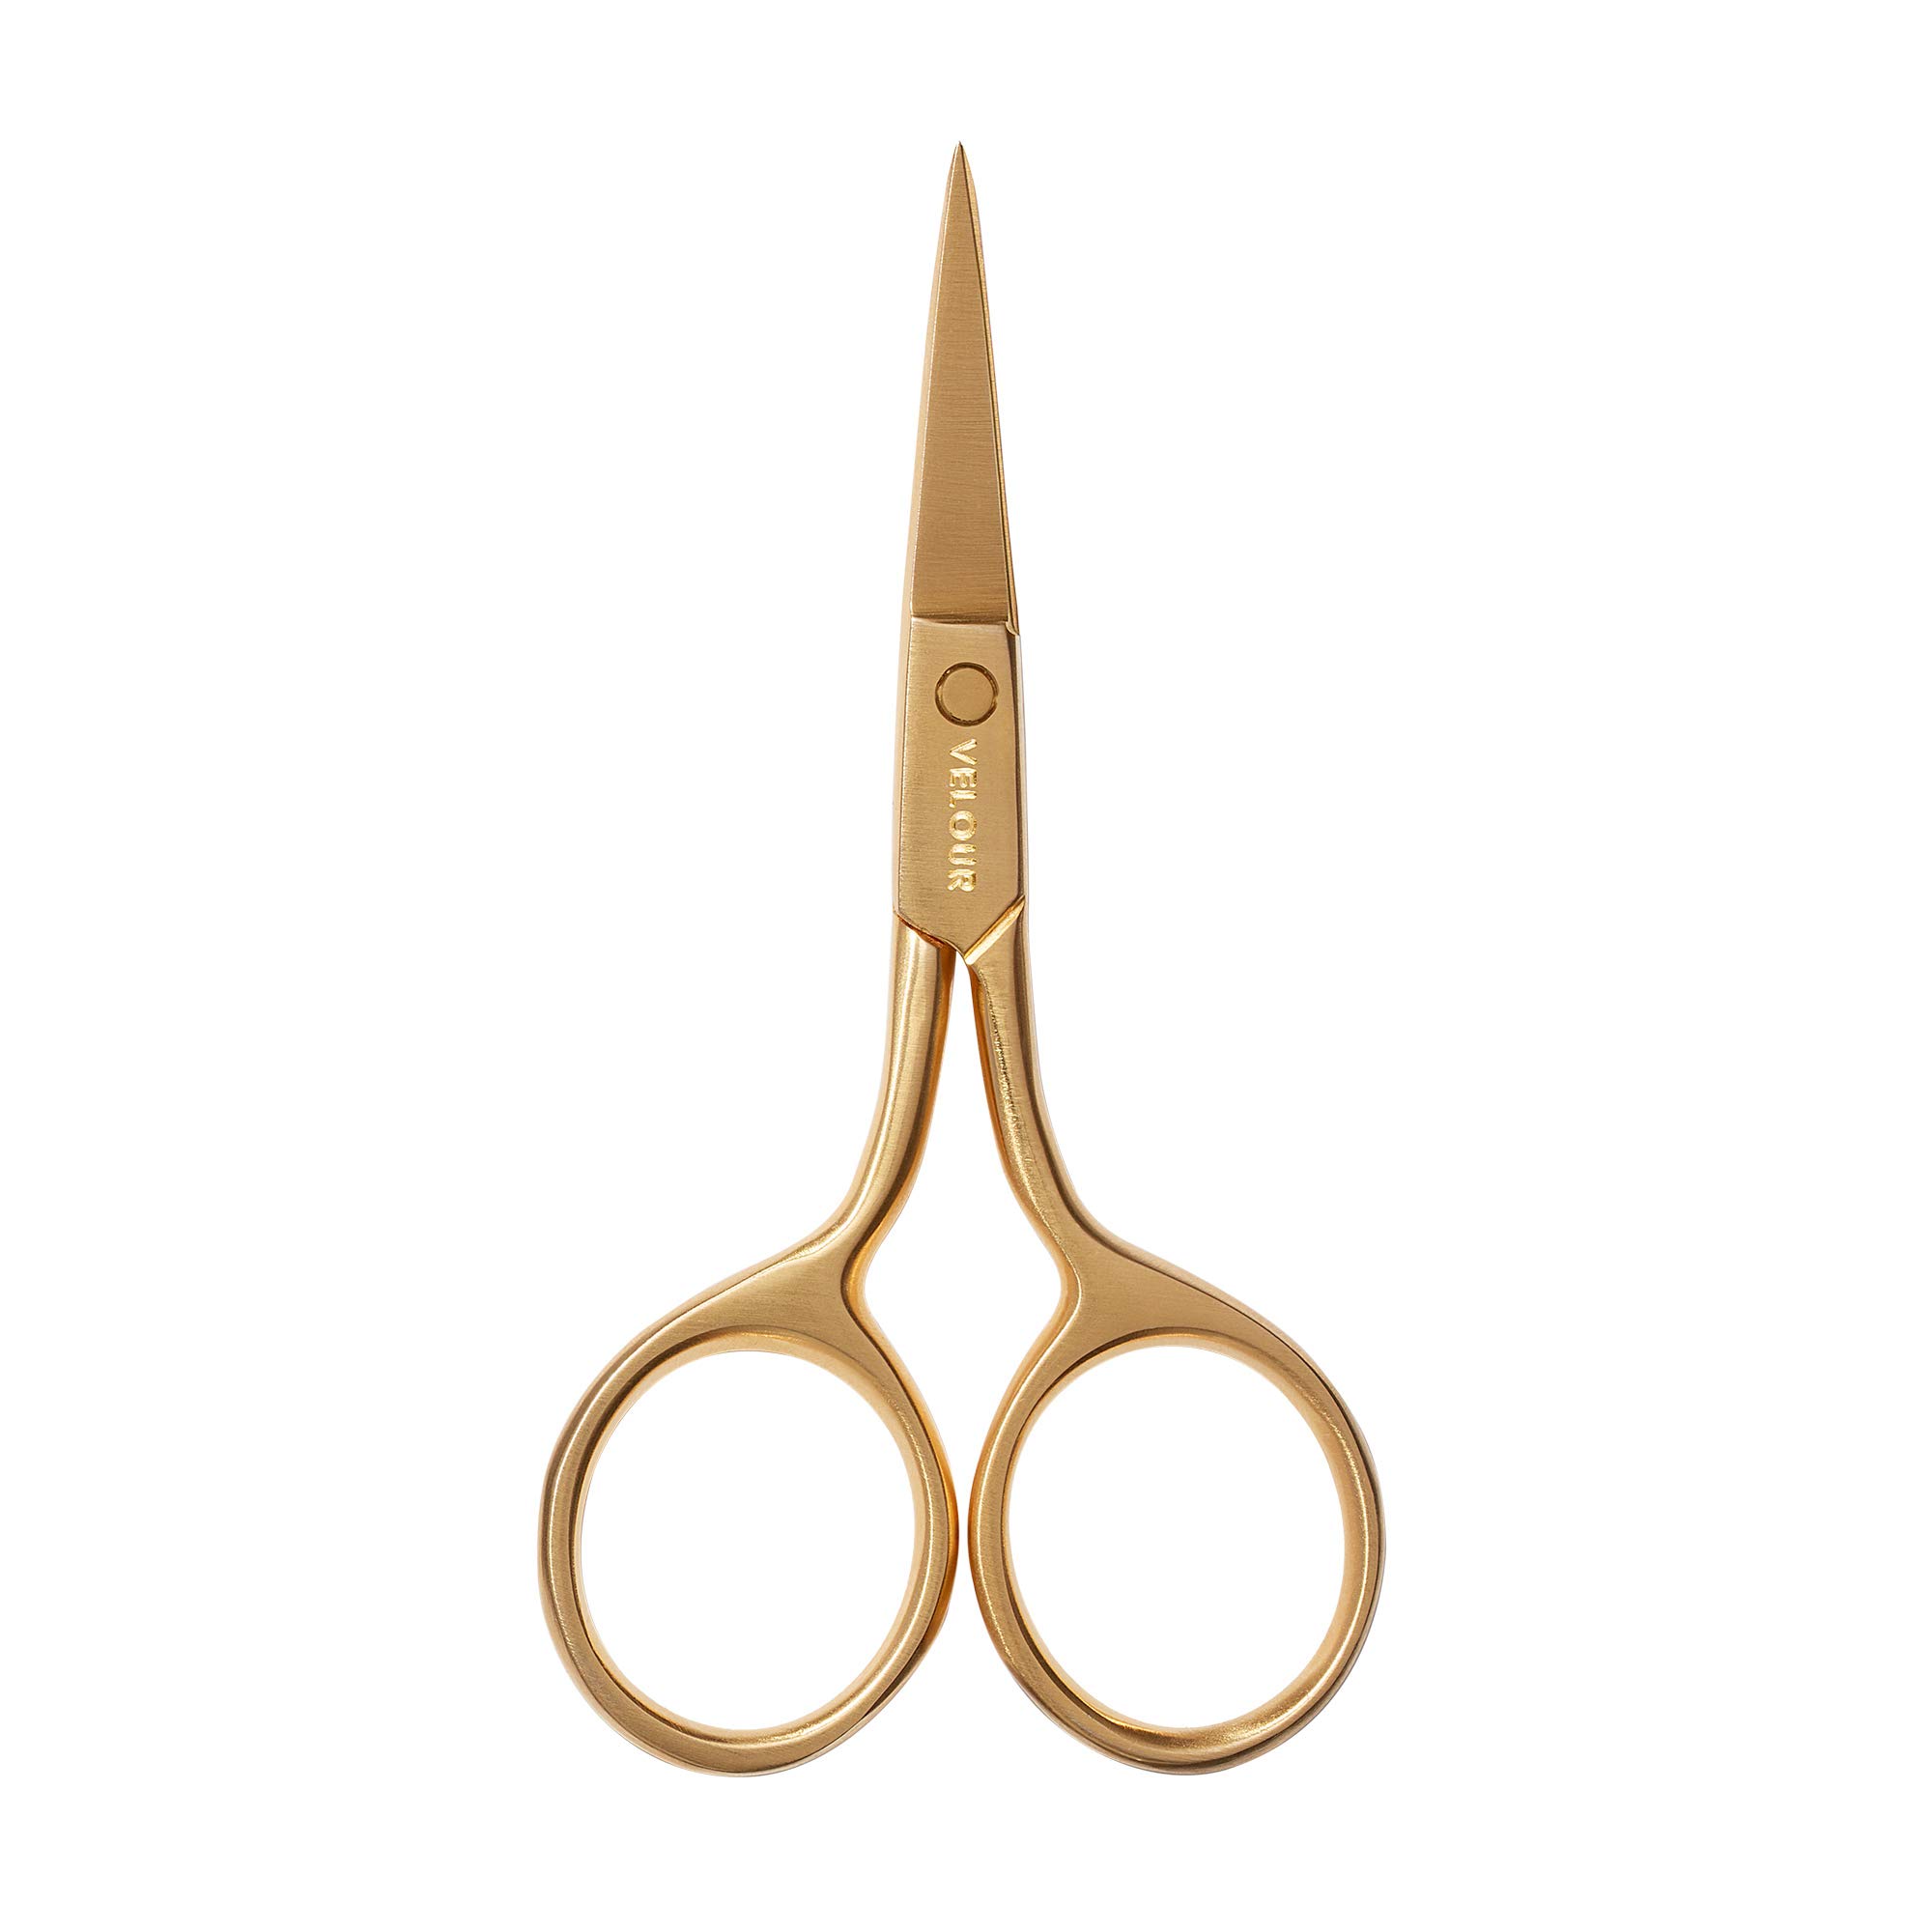 Velour Too Sharp Lash Scissors - Gold Stainless Steel - Small Hair Scissors  for Brows, False Lashes, and Facial Hair - Pointed and Sharp Tip Shape  Cutter - Portable Beauty Tool